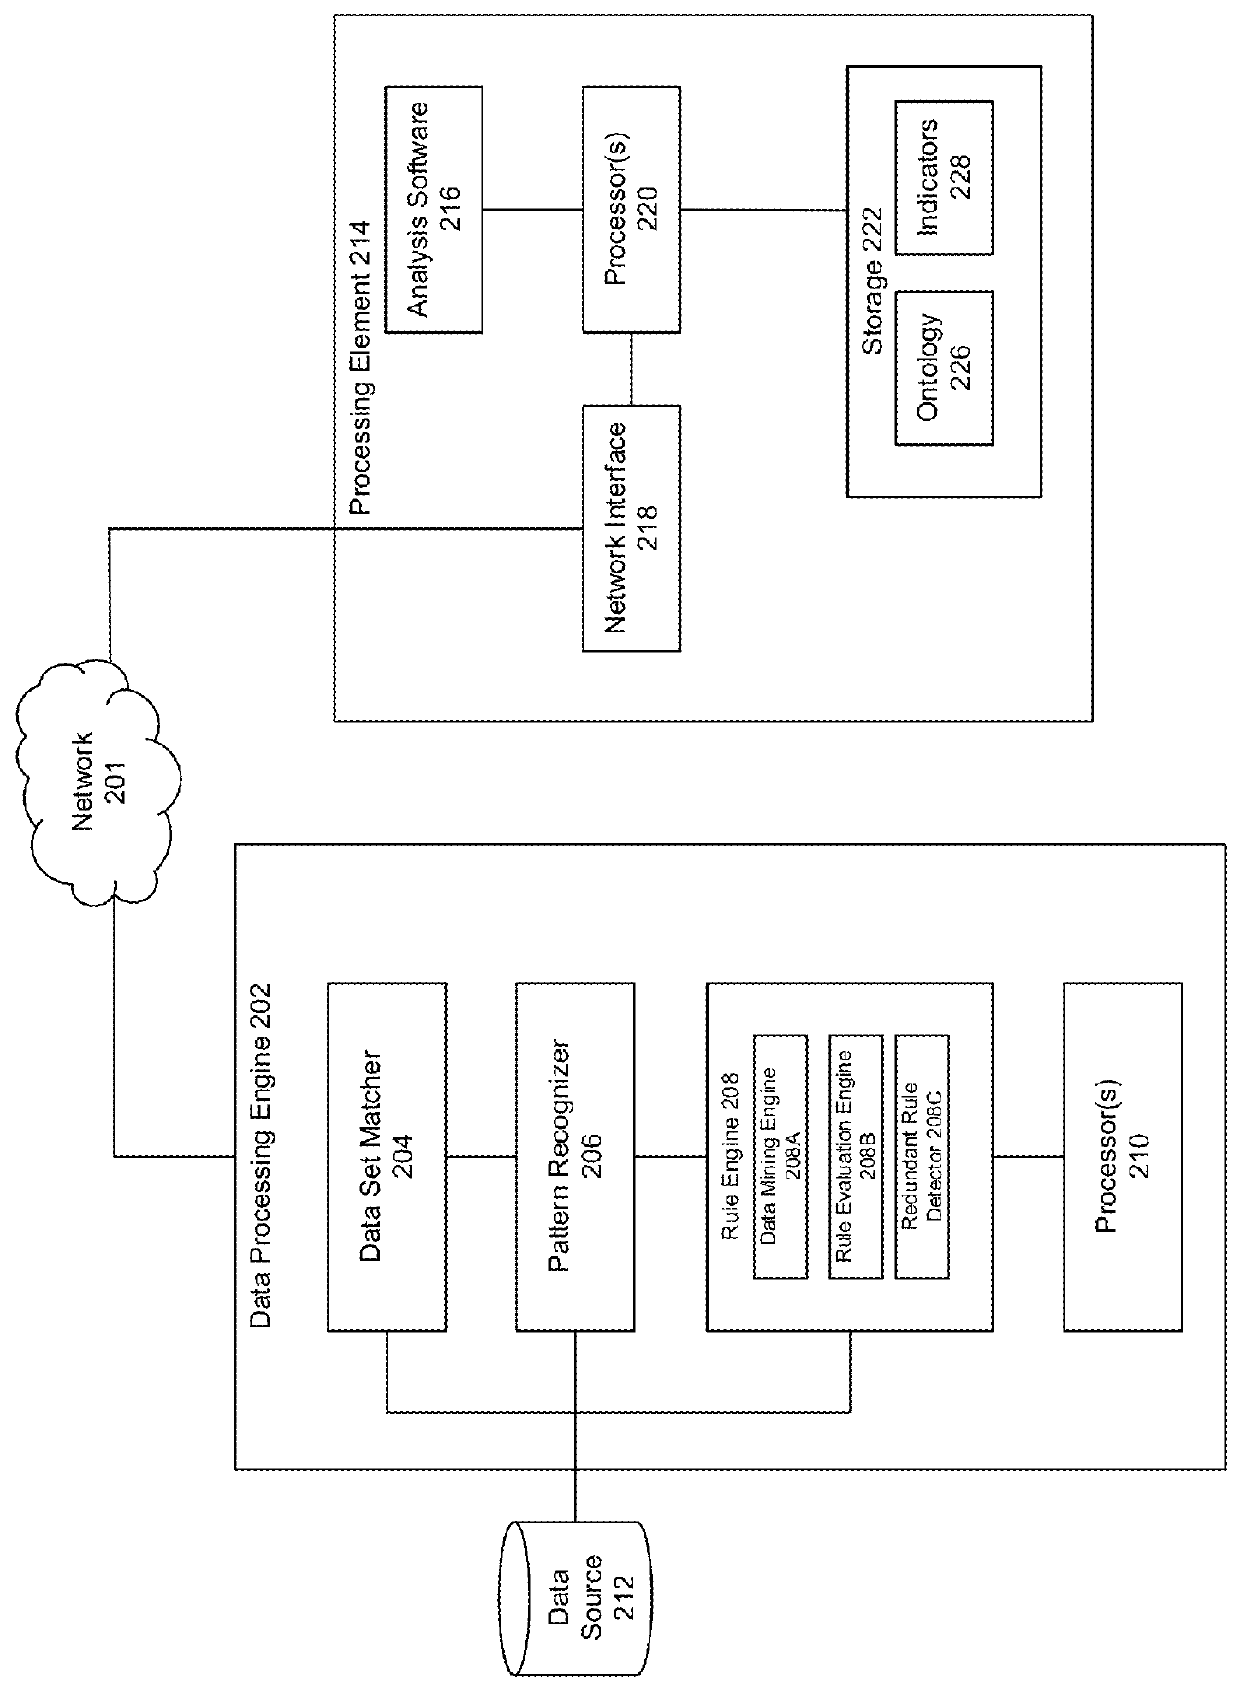 Distributed fp-growth with node table for large-scale association rule mining